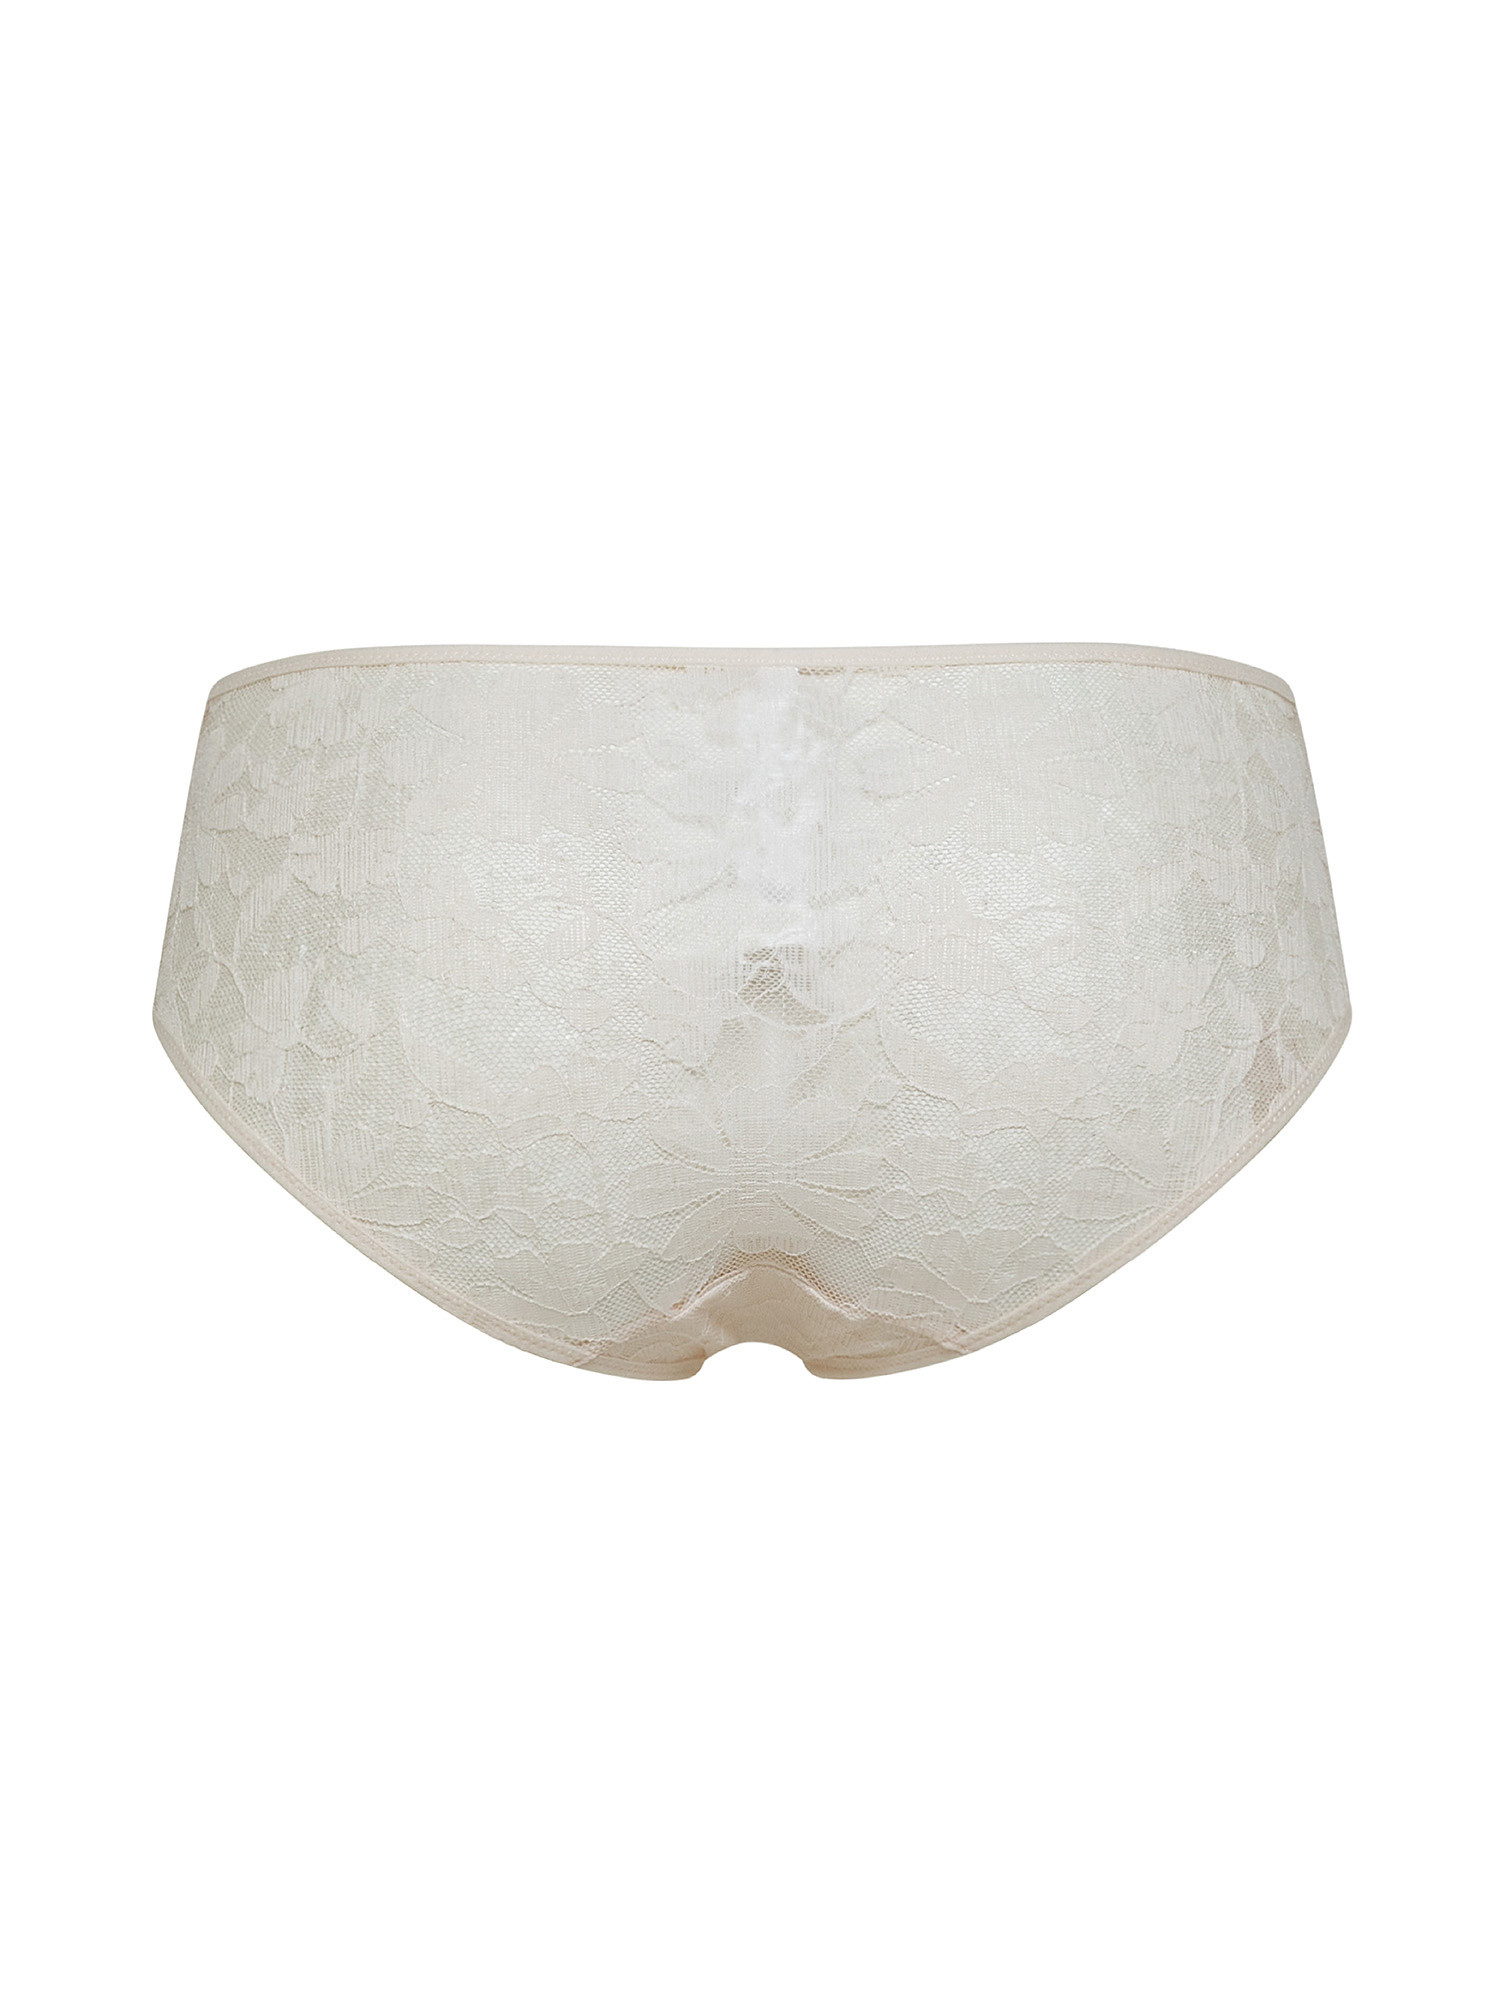 Lace briefs, White Cream, large image number 1